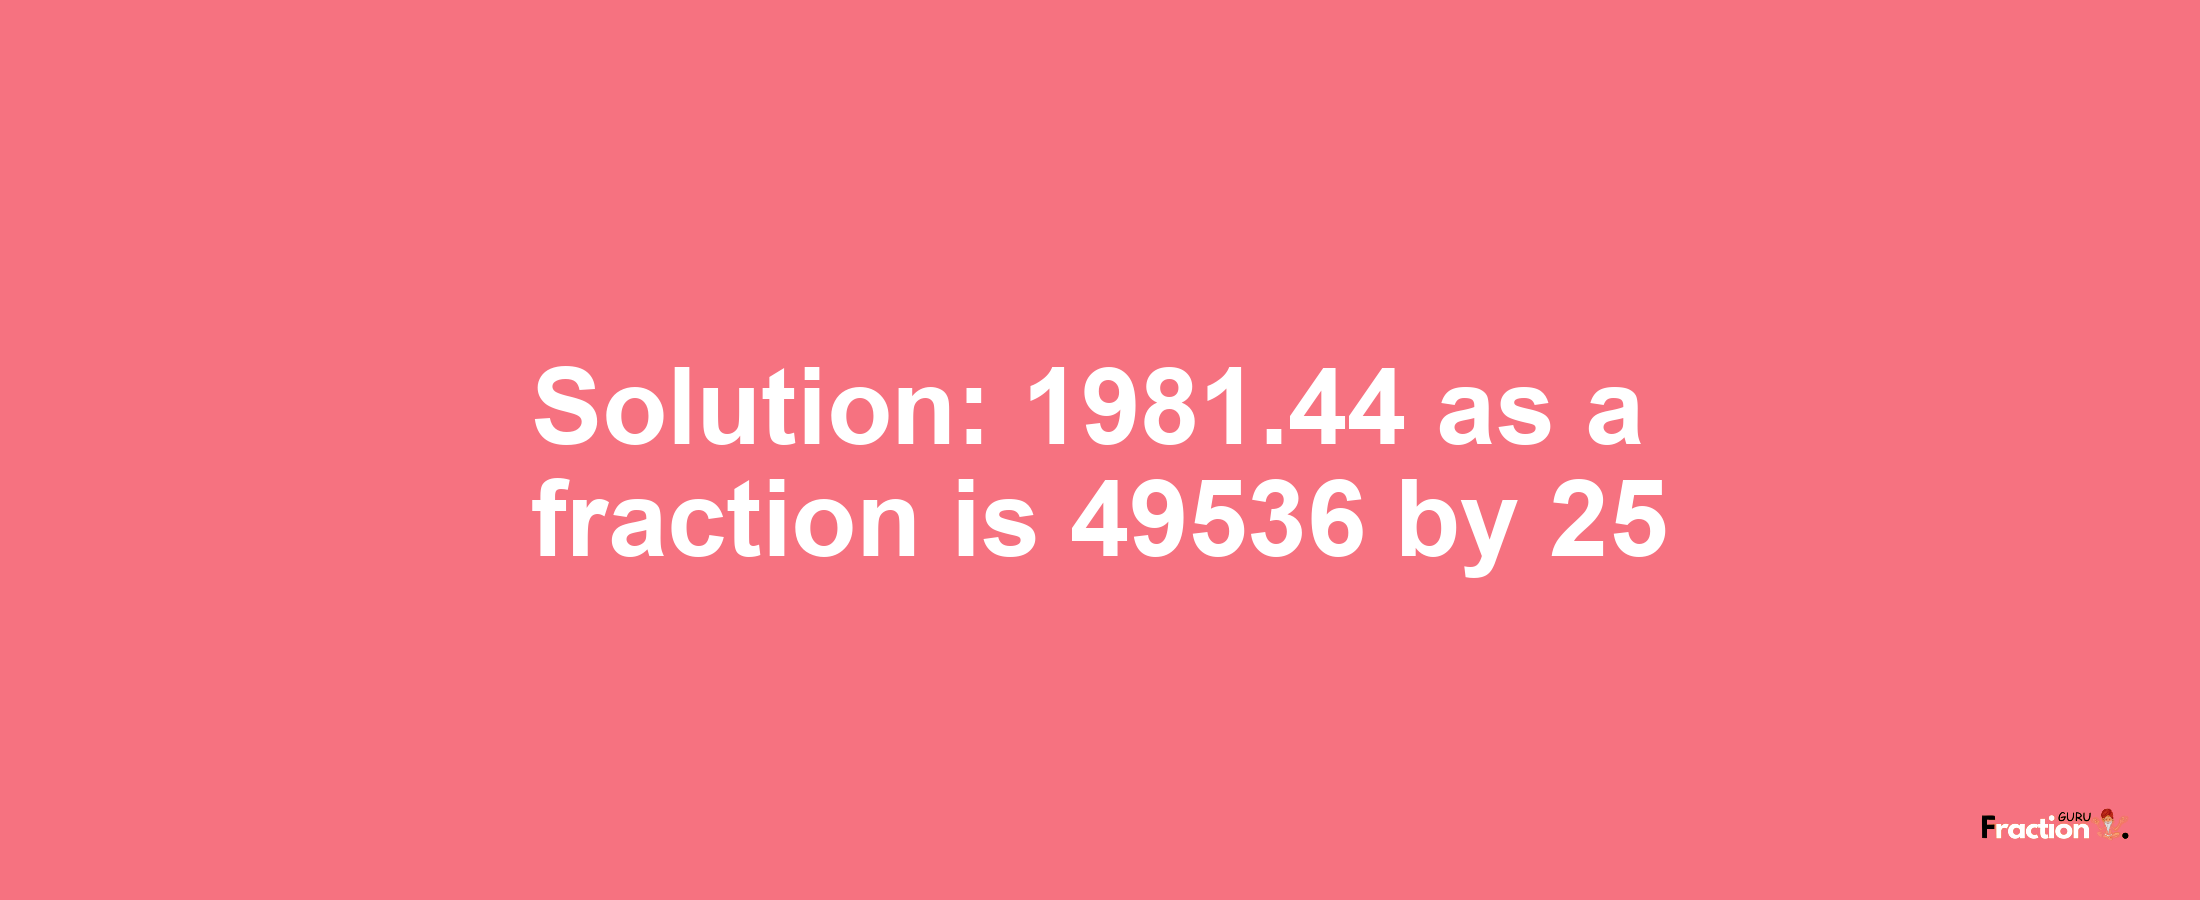 Solution:1981.44 as a fraction is 49536/25